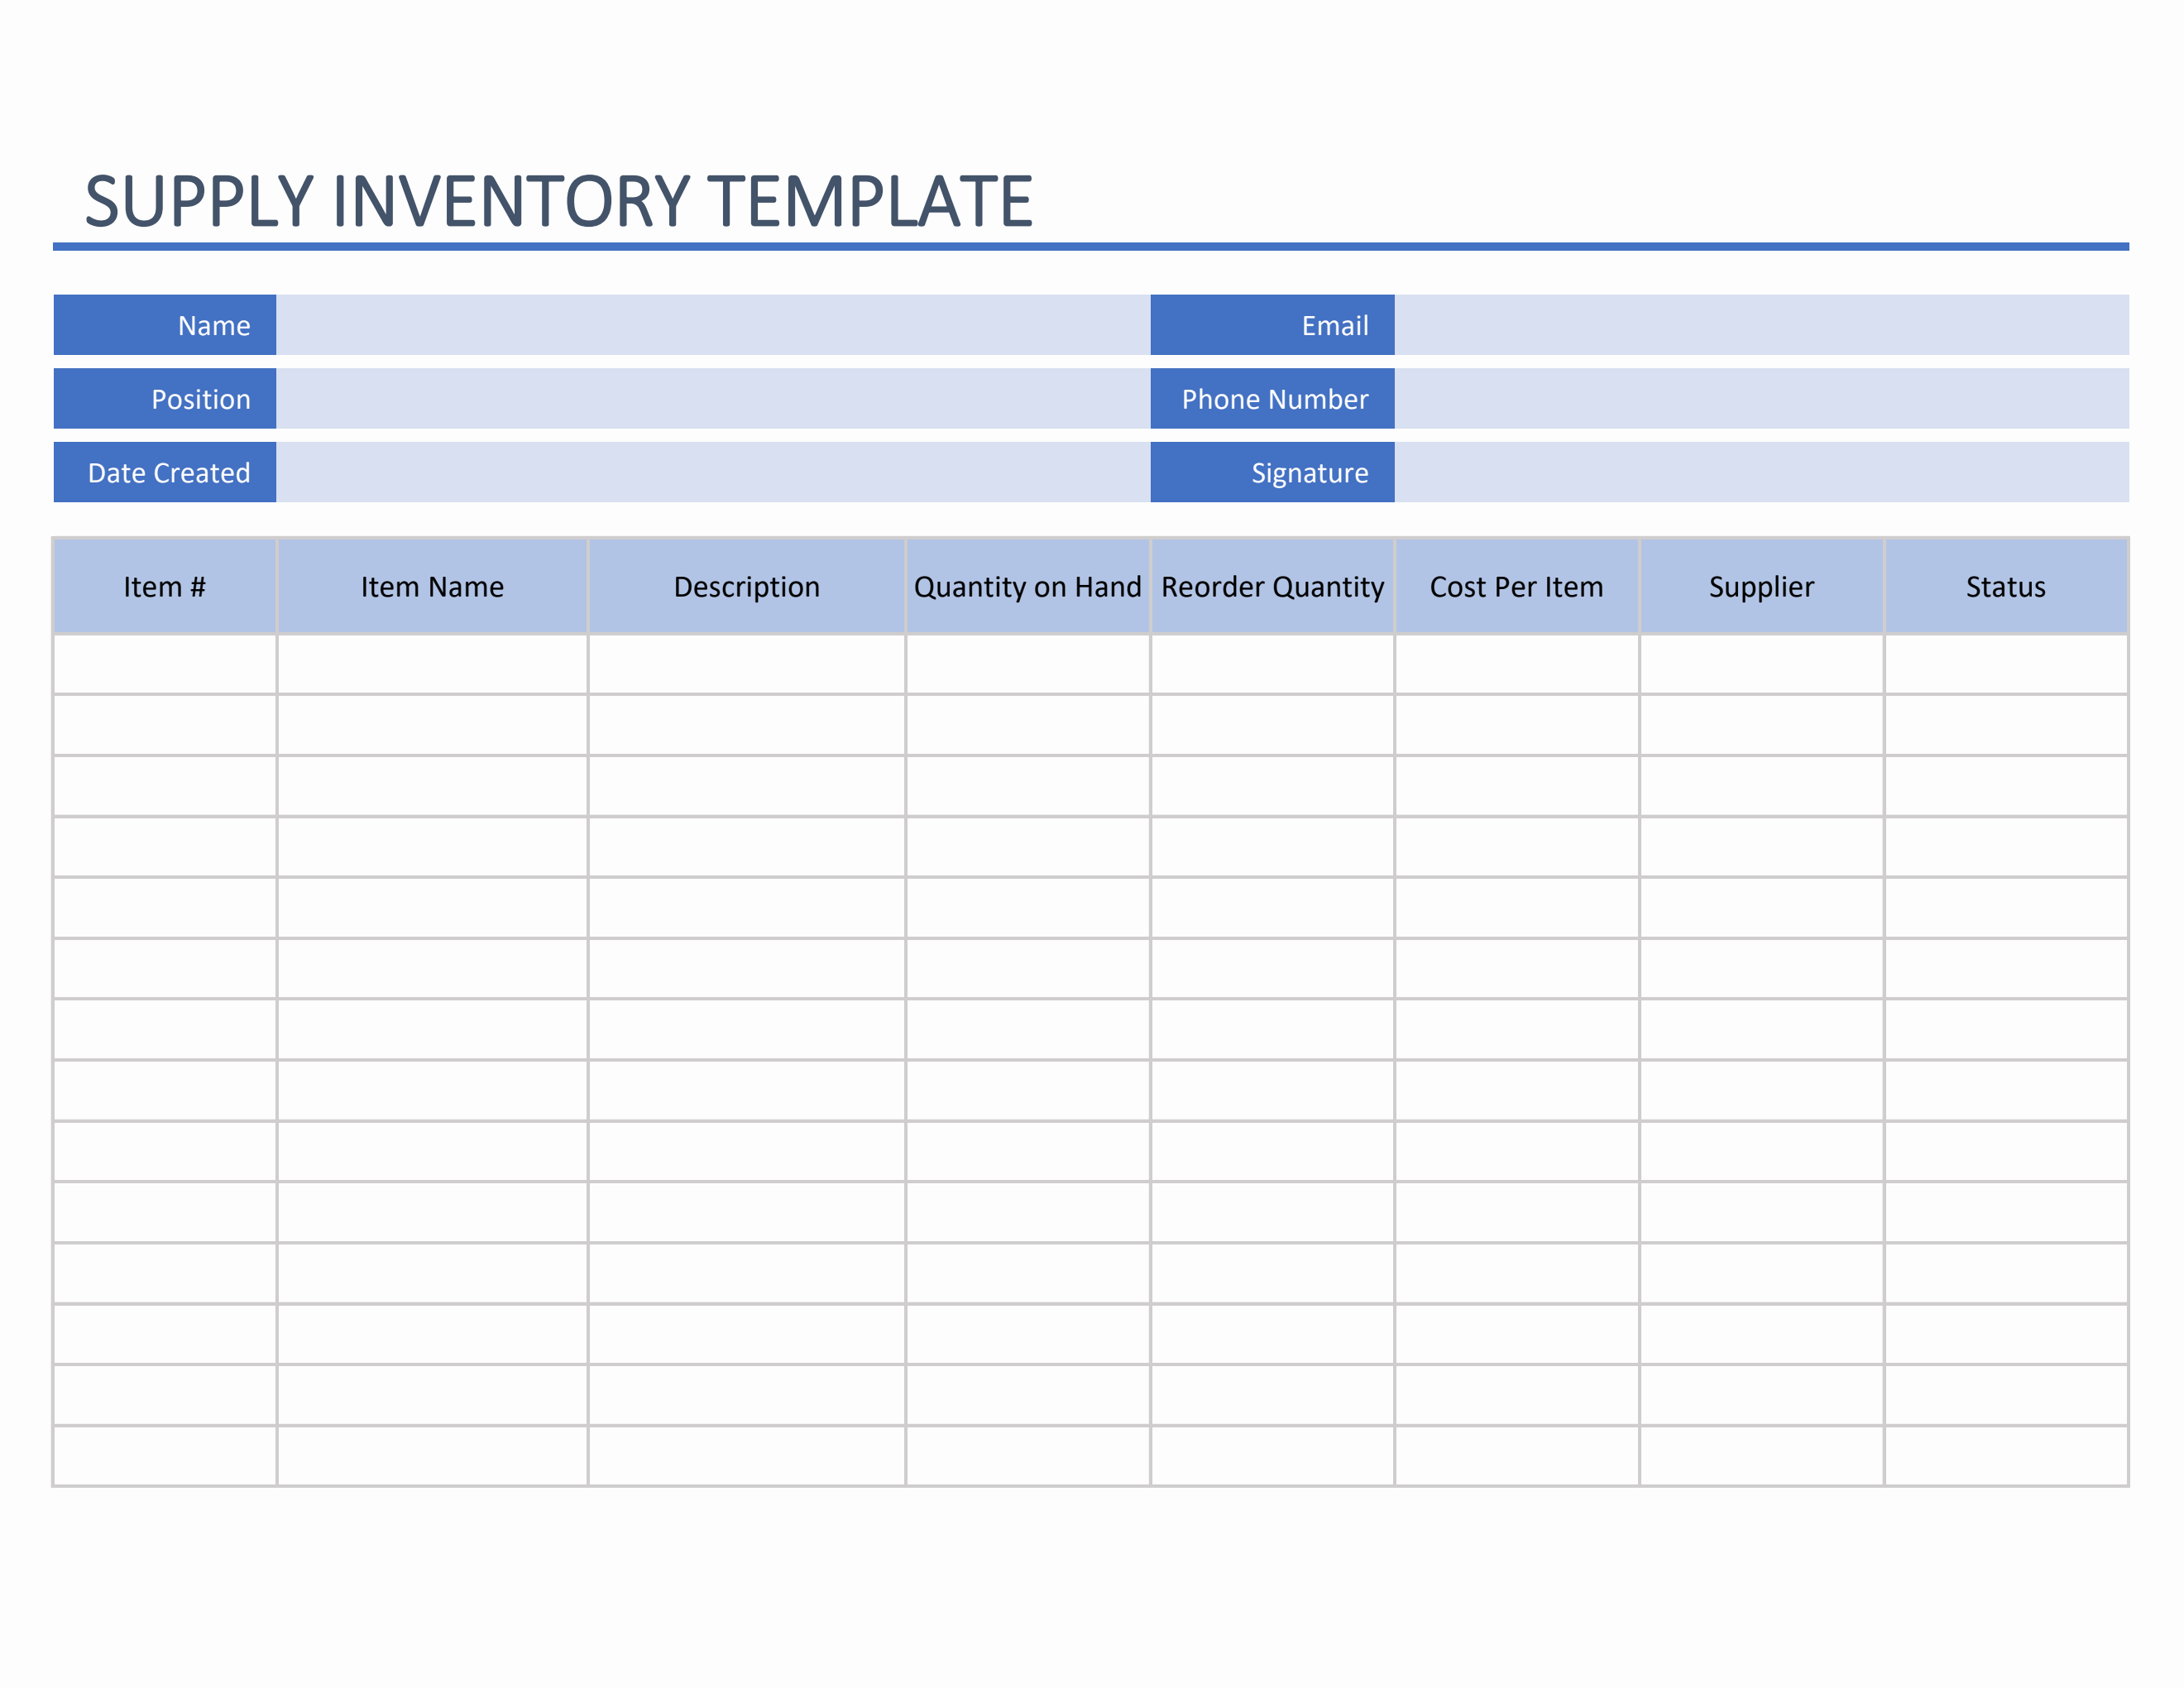 Add Item to Inventory Form